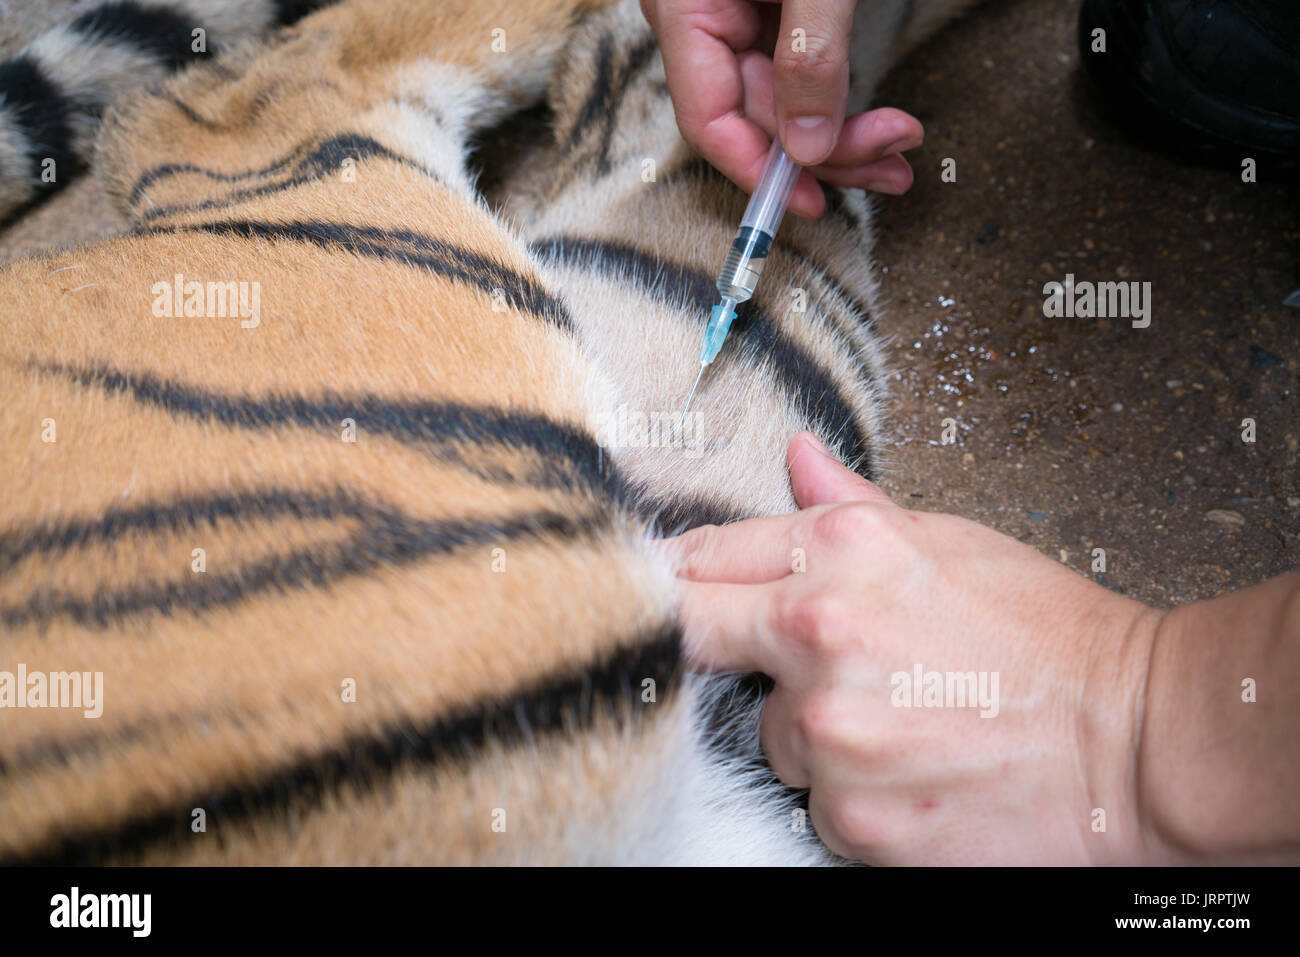 veterinarian and zookeeper getting blood drawn from the tiger Stock Photo